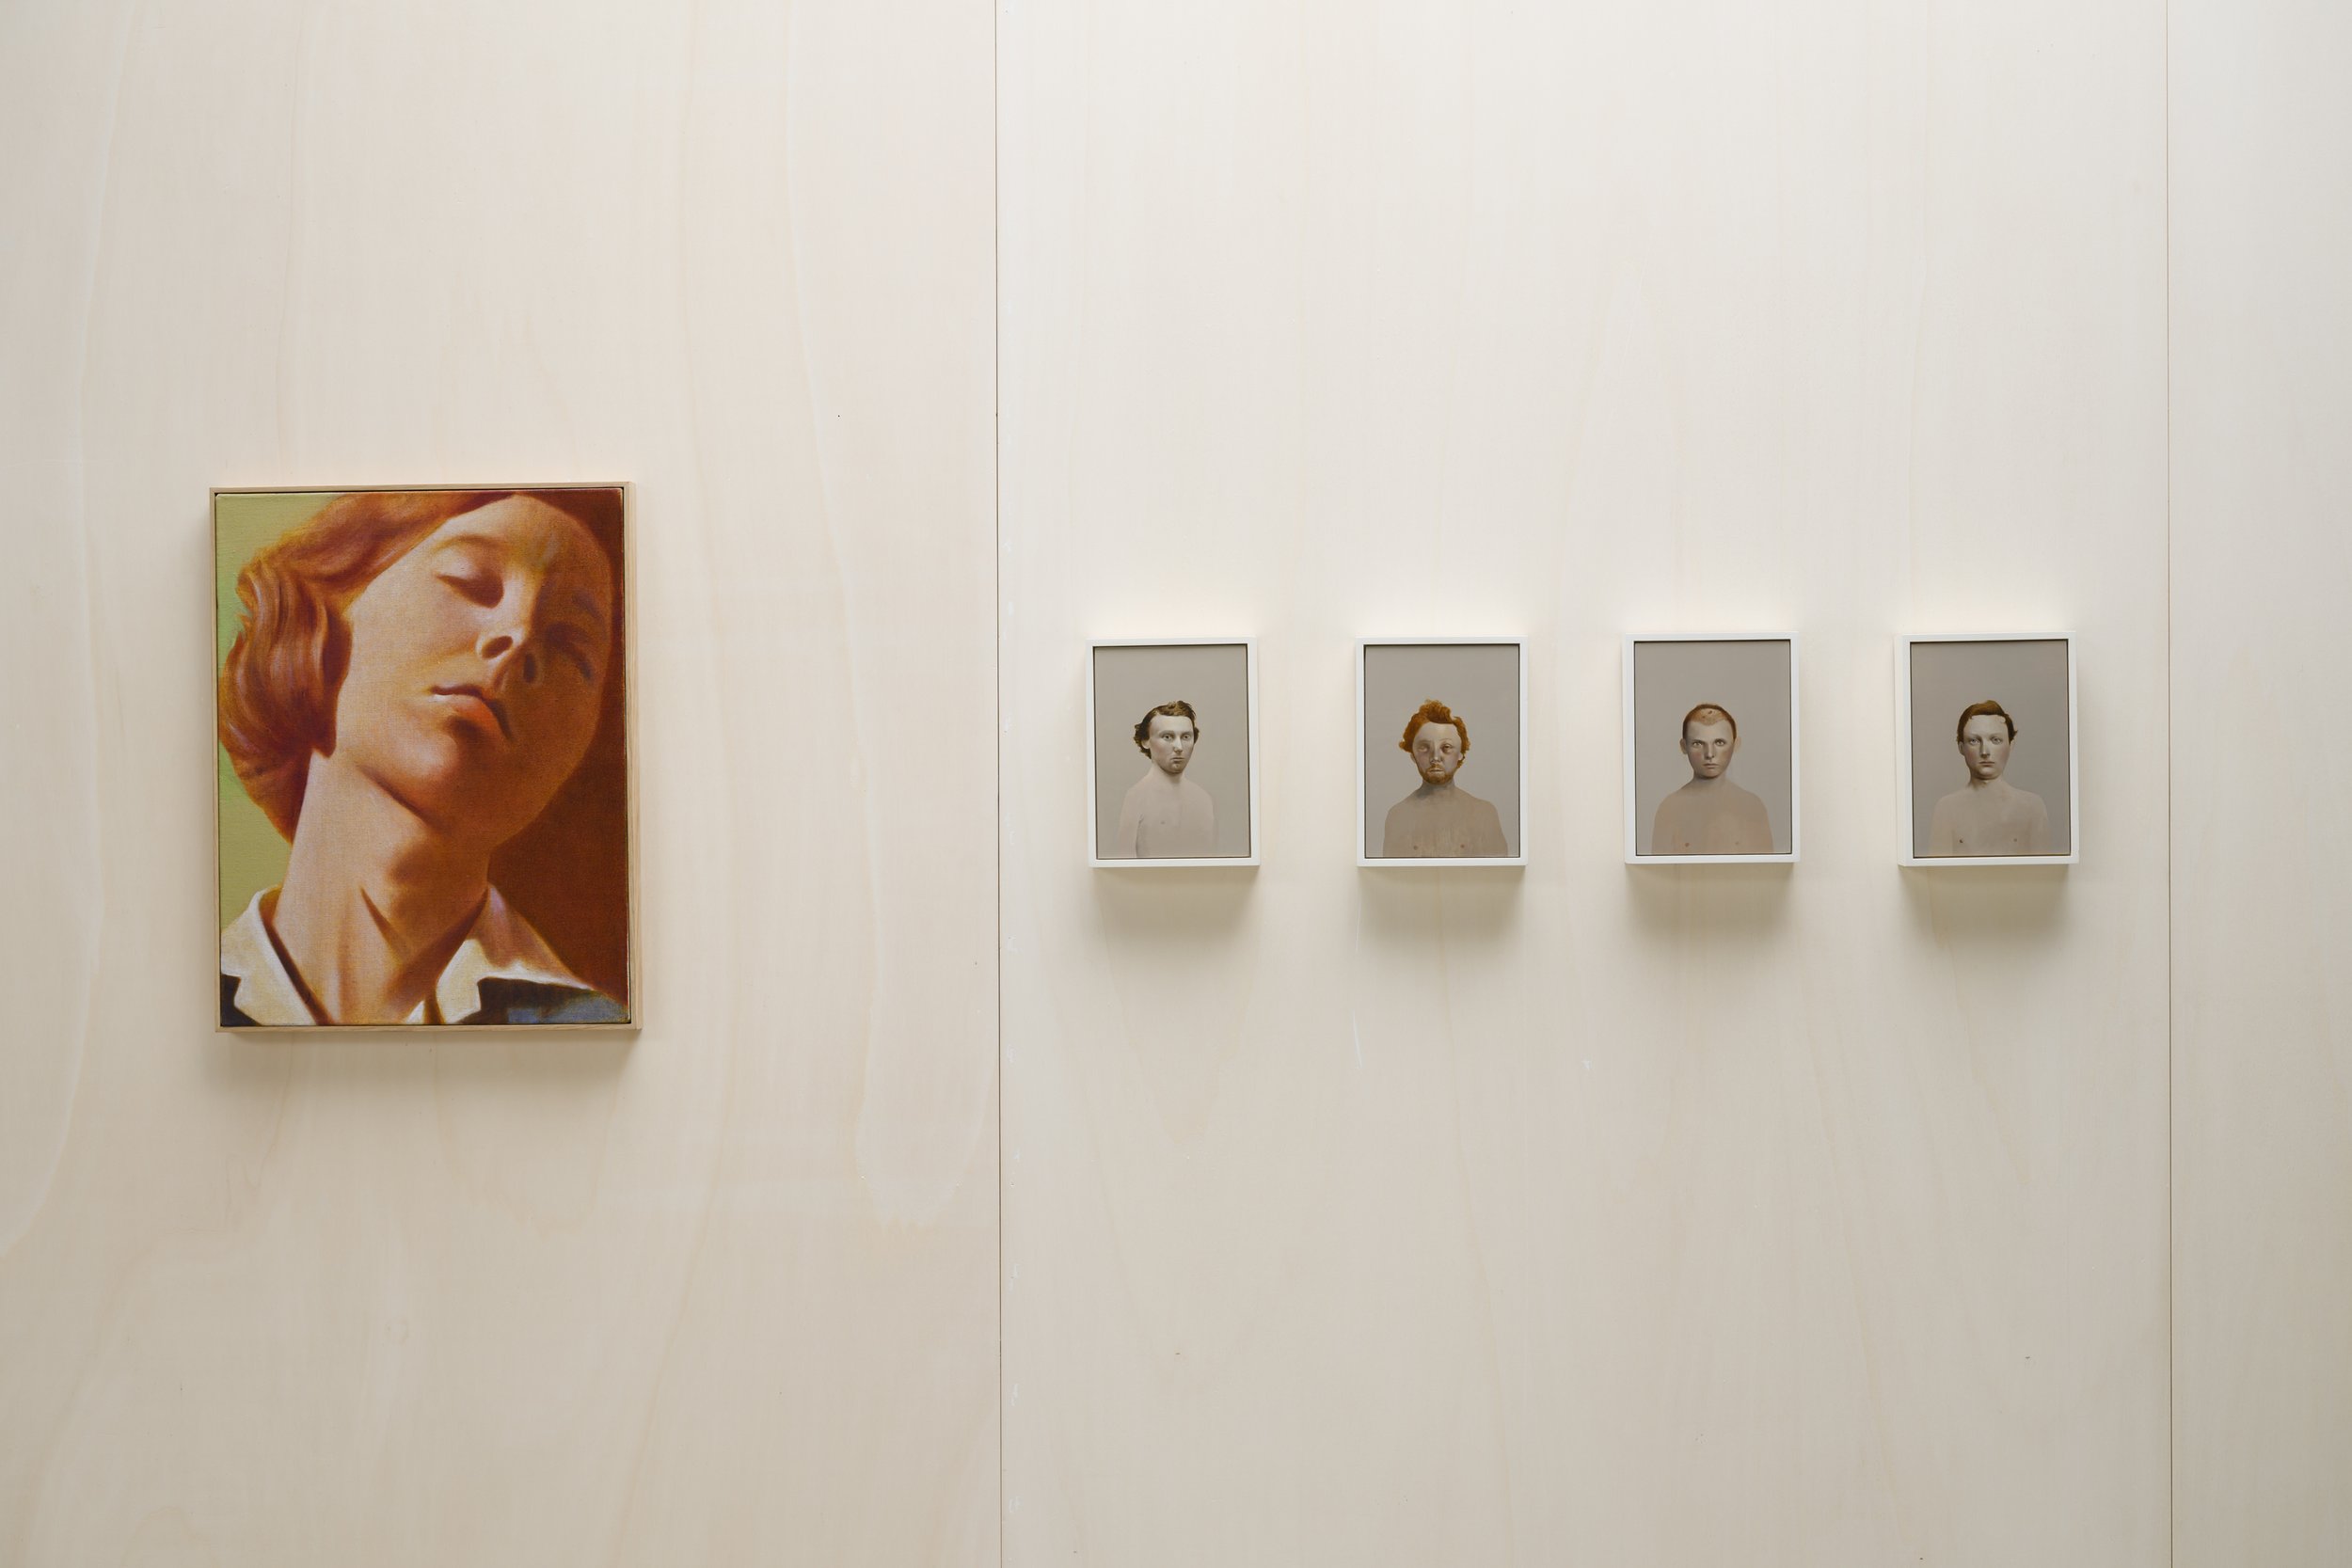  Louise Giovanelli, Installation view of ‘Peeping Tom’; Sarah Ball, Installation view of ‘Damaged Humans: Soldier (Civil War)’ 